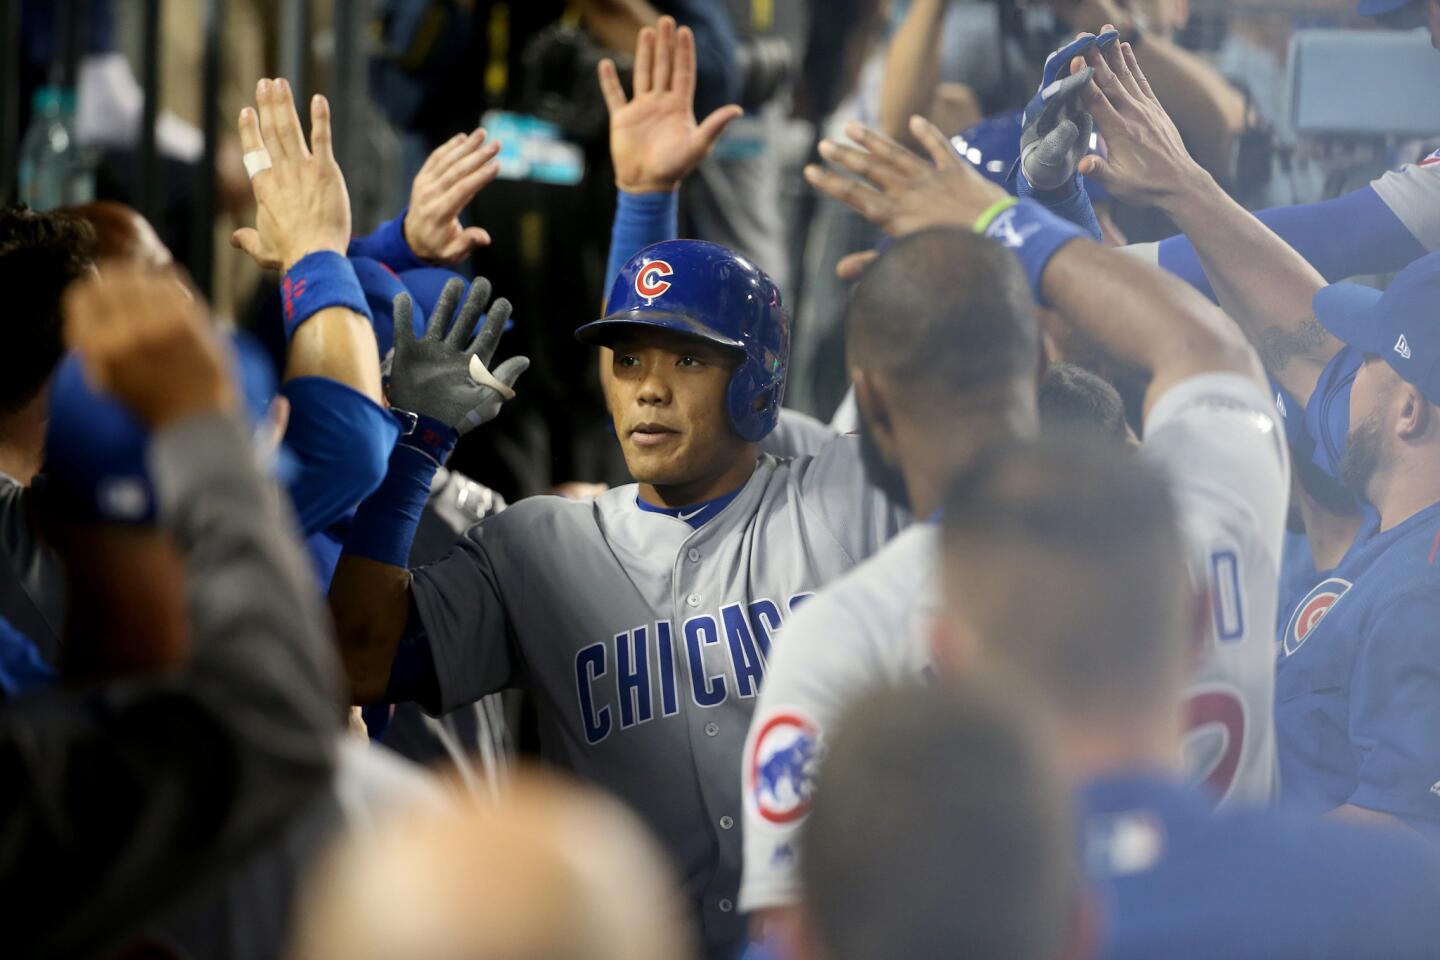 NLCS Game 4: Cubs 10, Dodgers 2